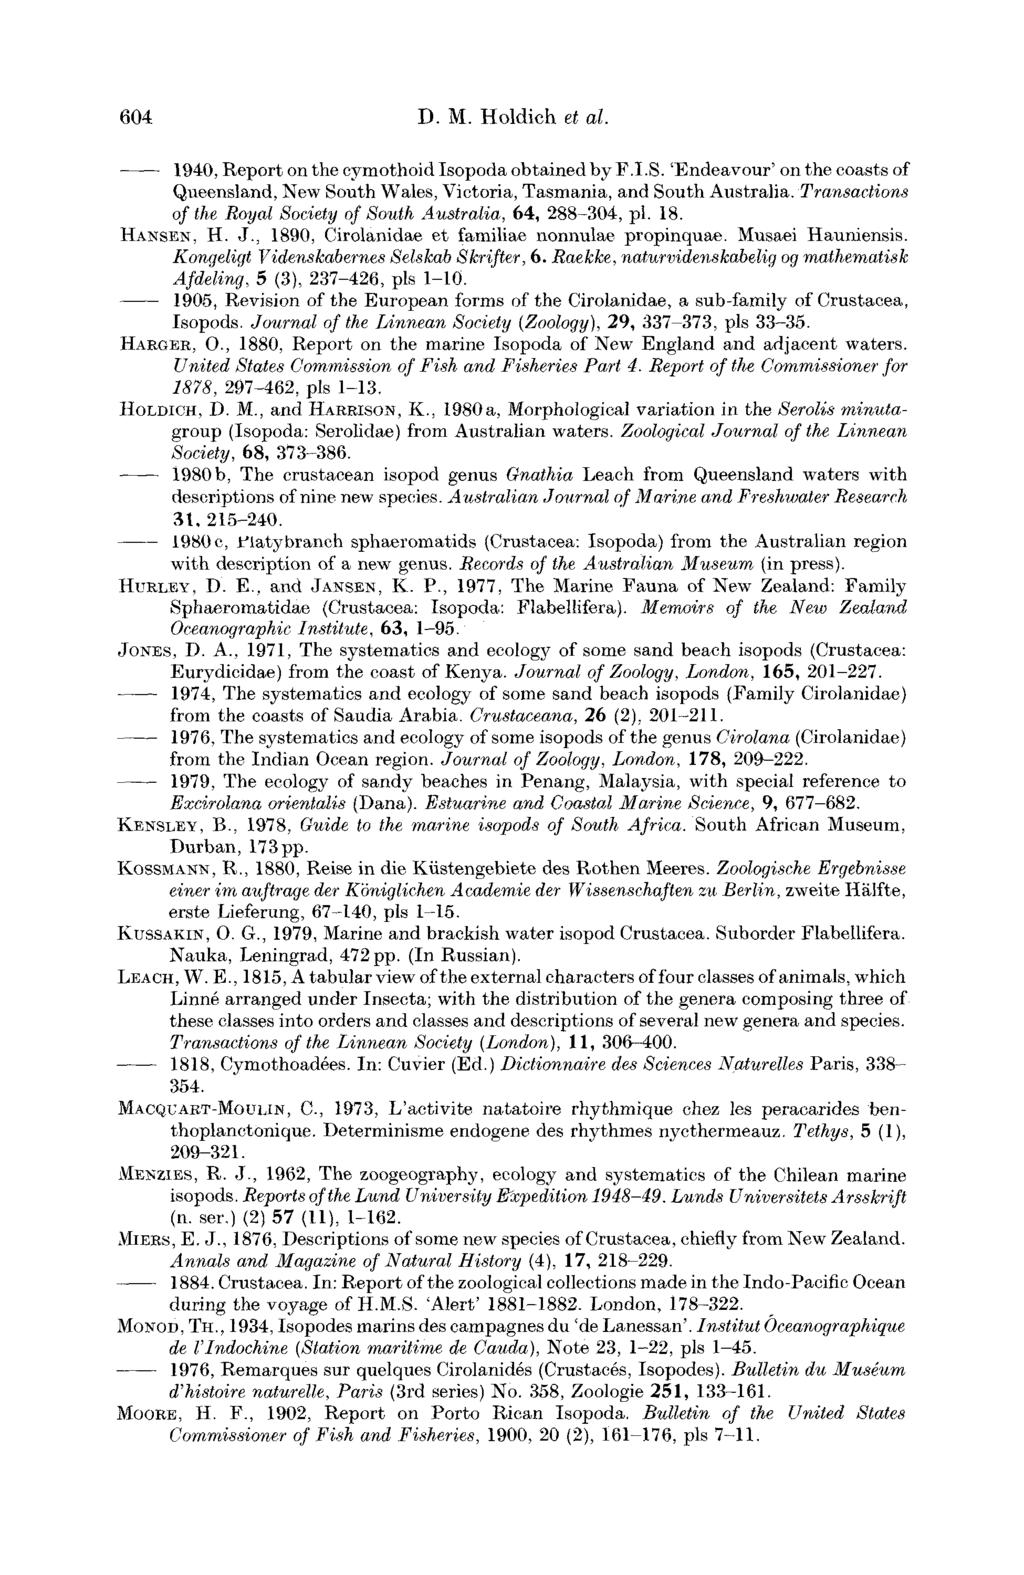 604 D. M. Holdich et al. 1940, Report on the oymothoid Isopoda obtained by F.I.S. 'Endeavour' on the coasts of Queensland, New South Wales, Victoria, Tasmania, and South Avistralia.